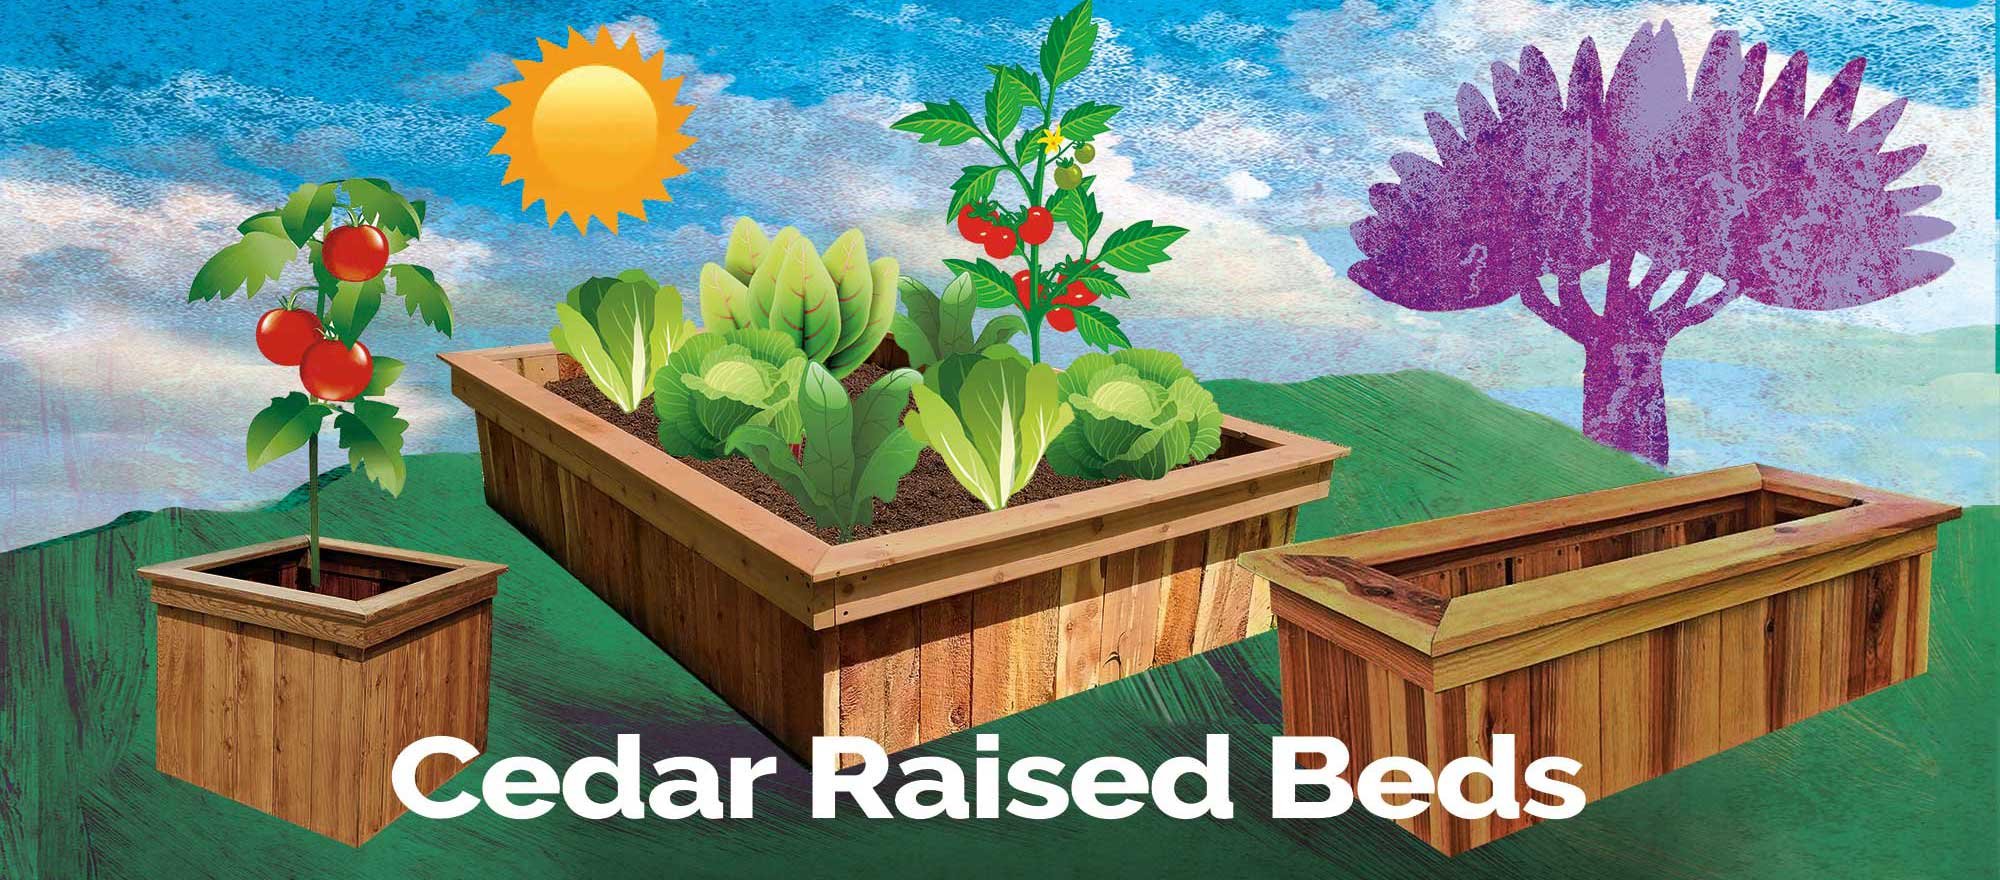 DRP-Home-Raised-Beds-Banner2-2000x880px.jpg